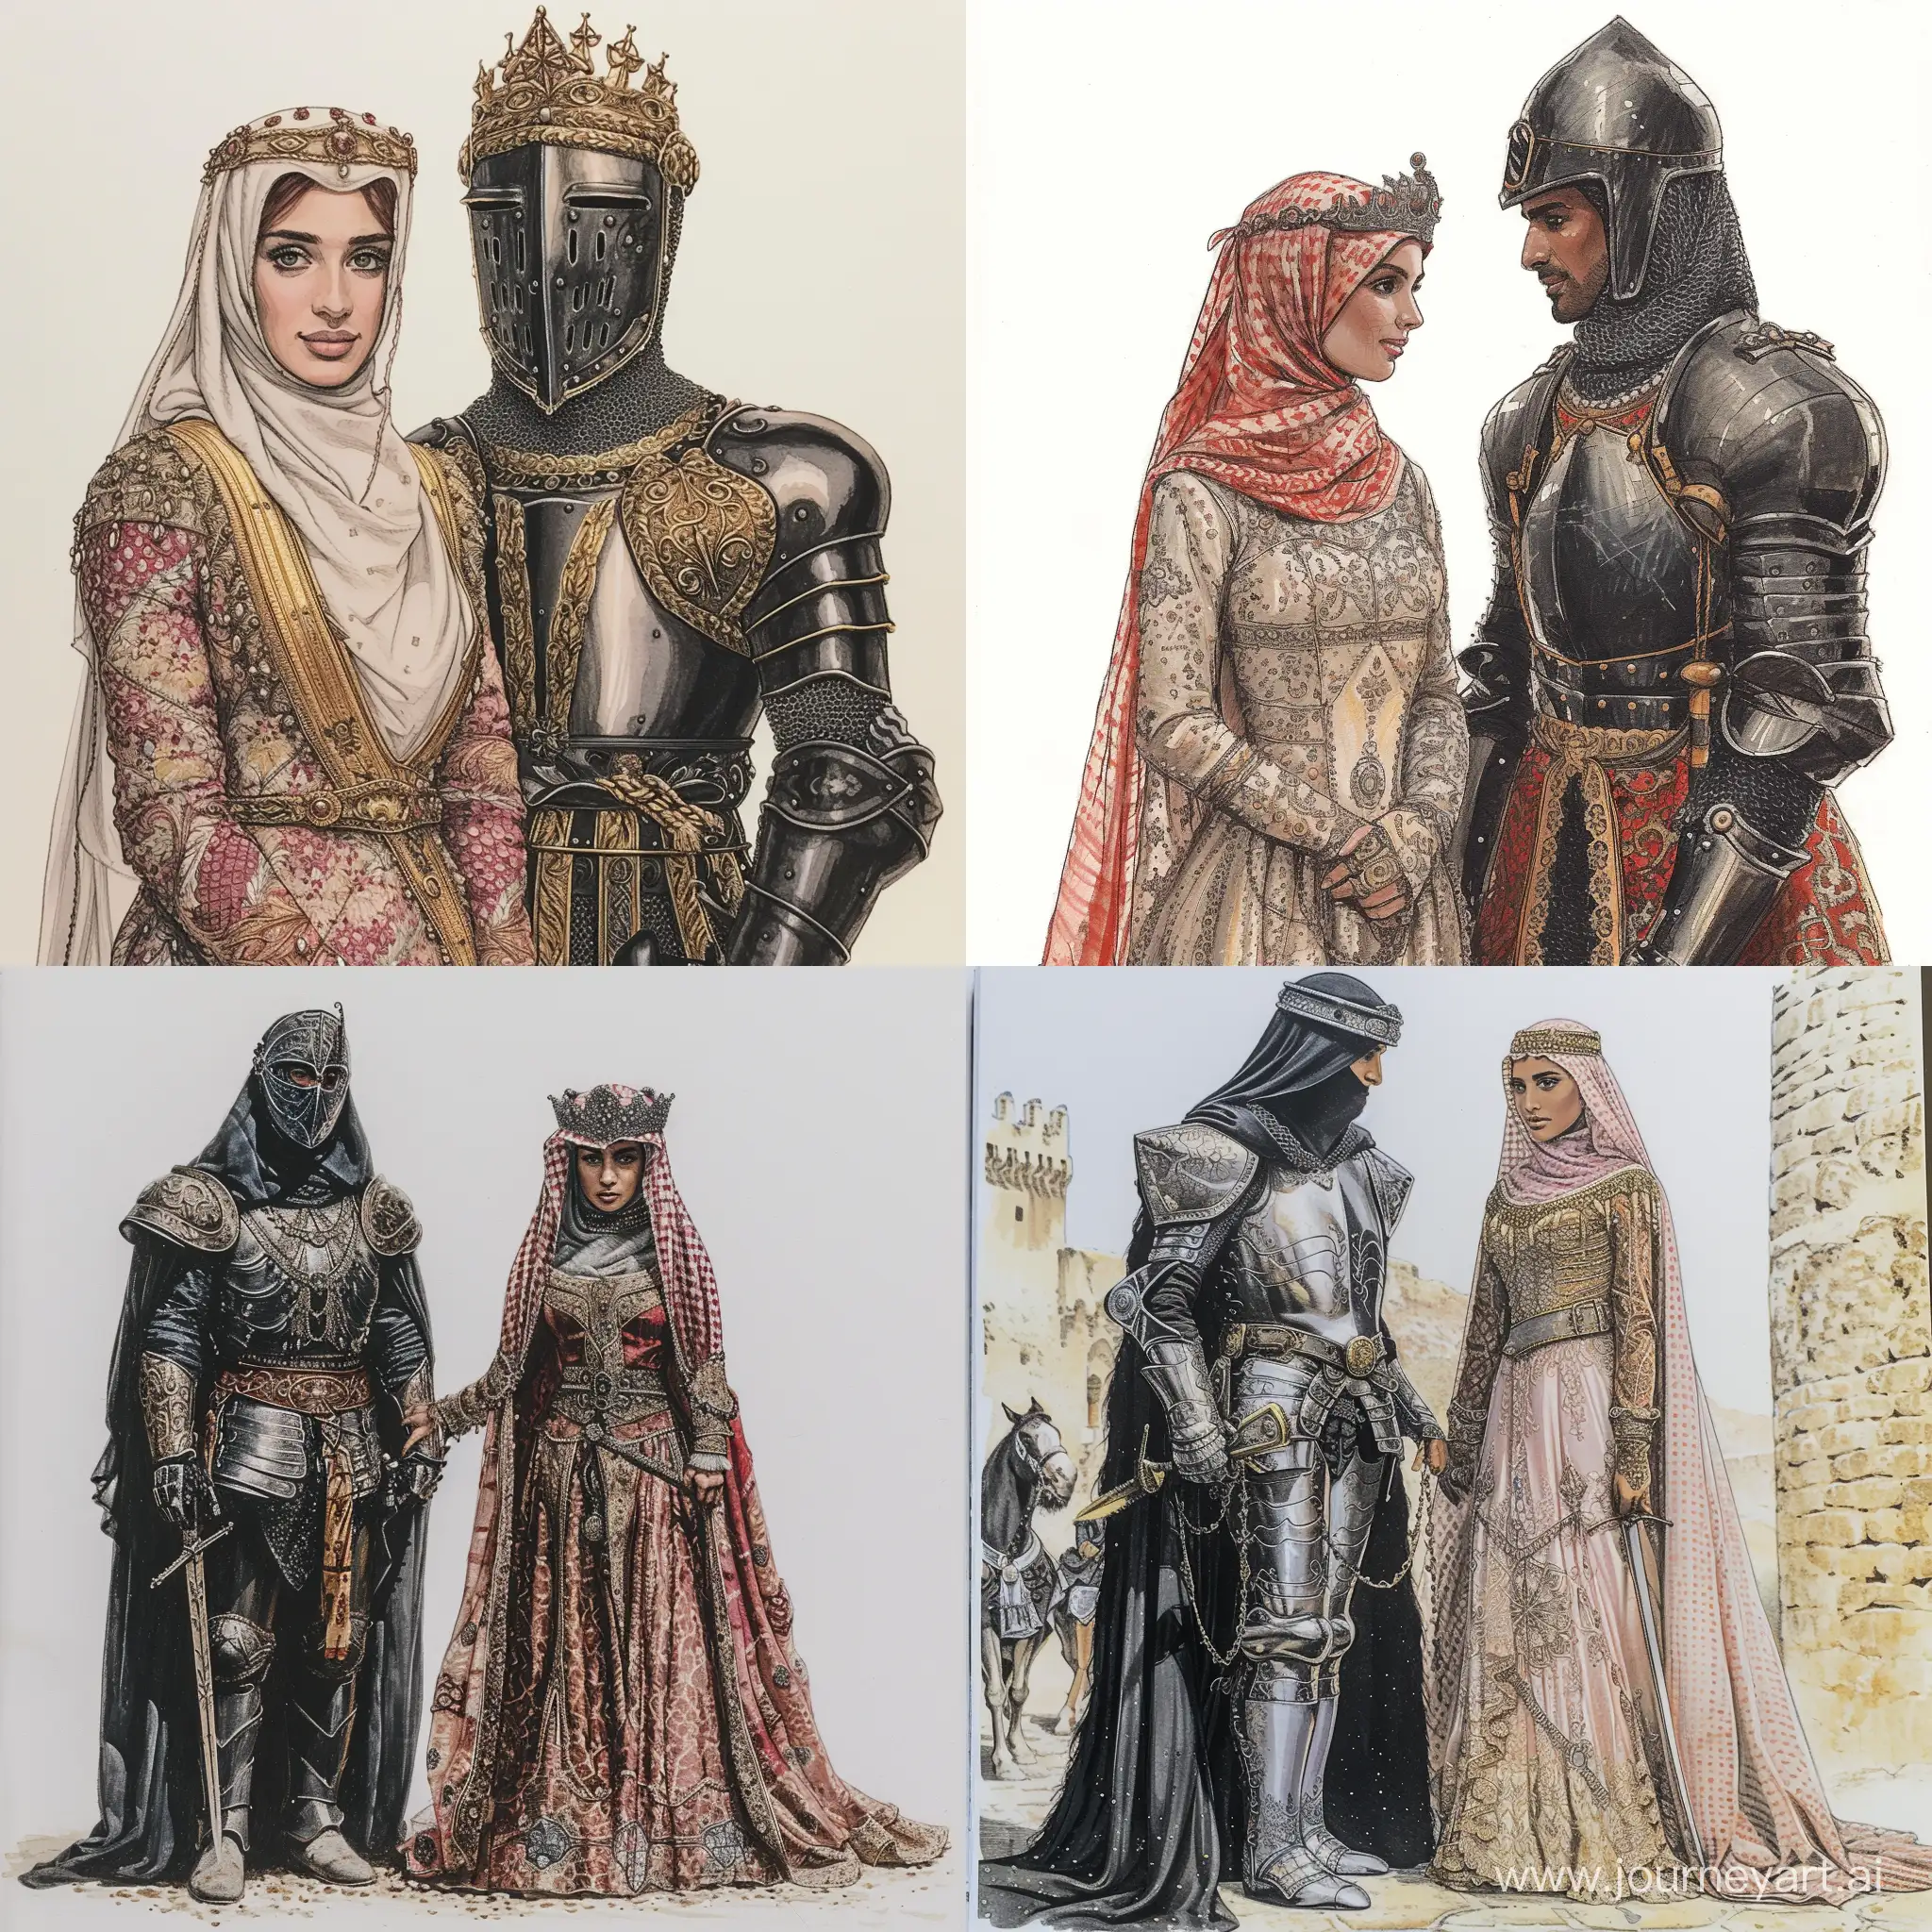 apollonia saintclair full coloured drawings book " ink in my blood" catalogue of  posing  standing pretty  saudi queen woman and her charming black knight guard wearing lawrence of arabia traditional Arab garb and lawrence of arabia headdress